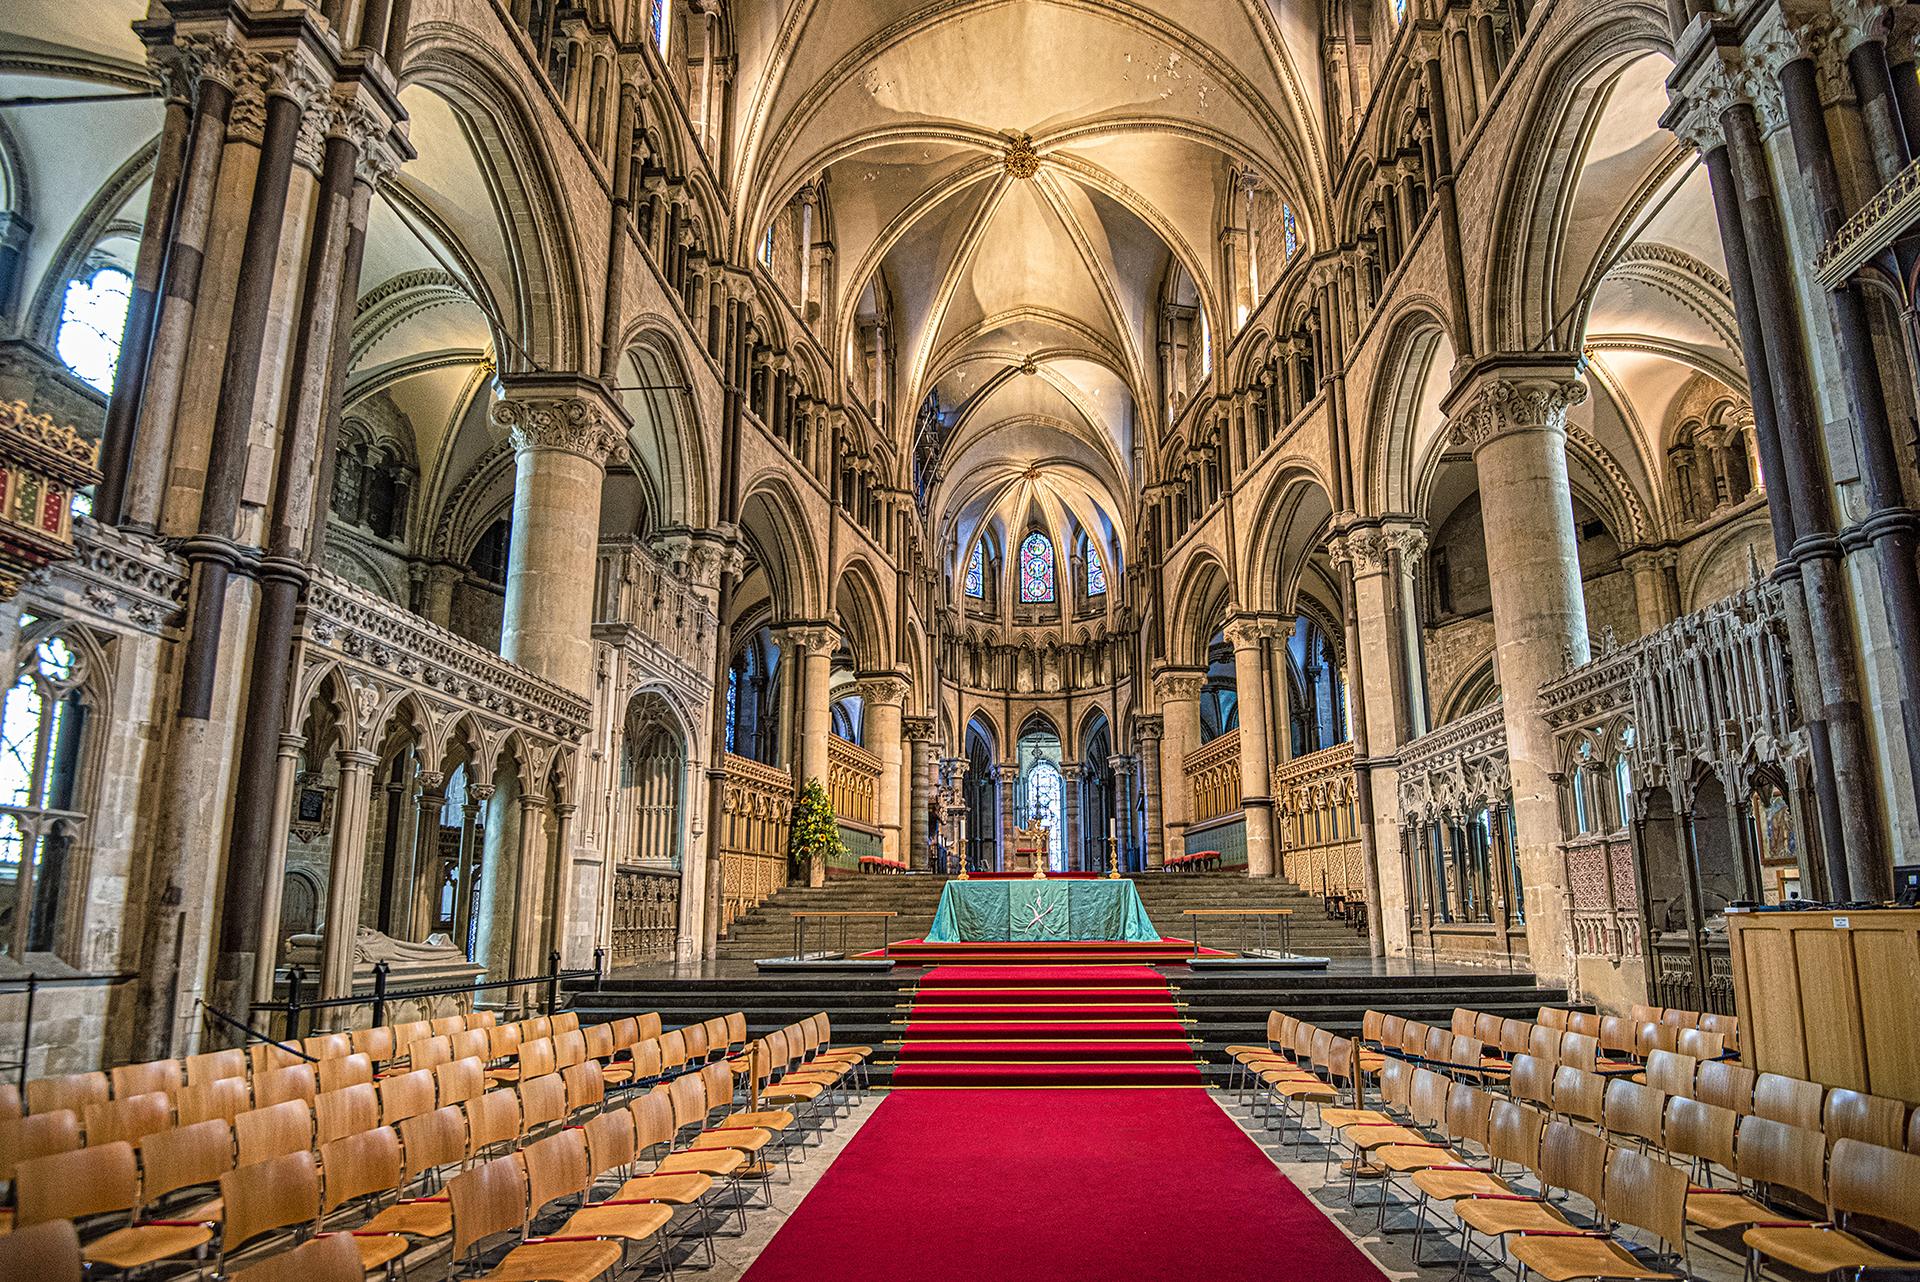 New York Photography Awards Winner - Canterbury Cathedral